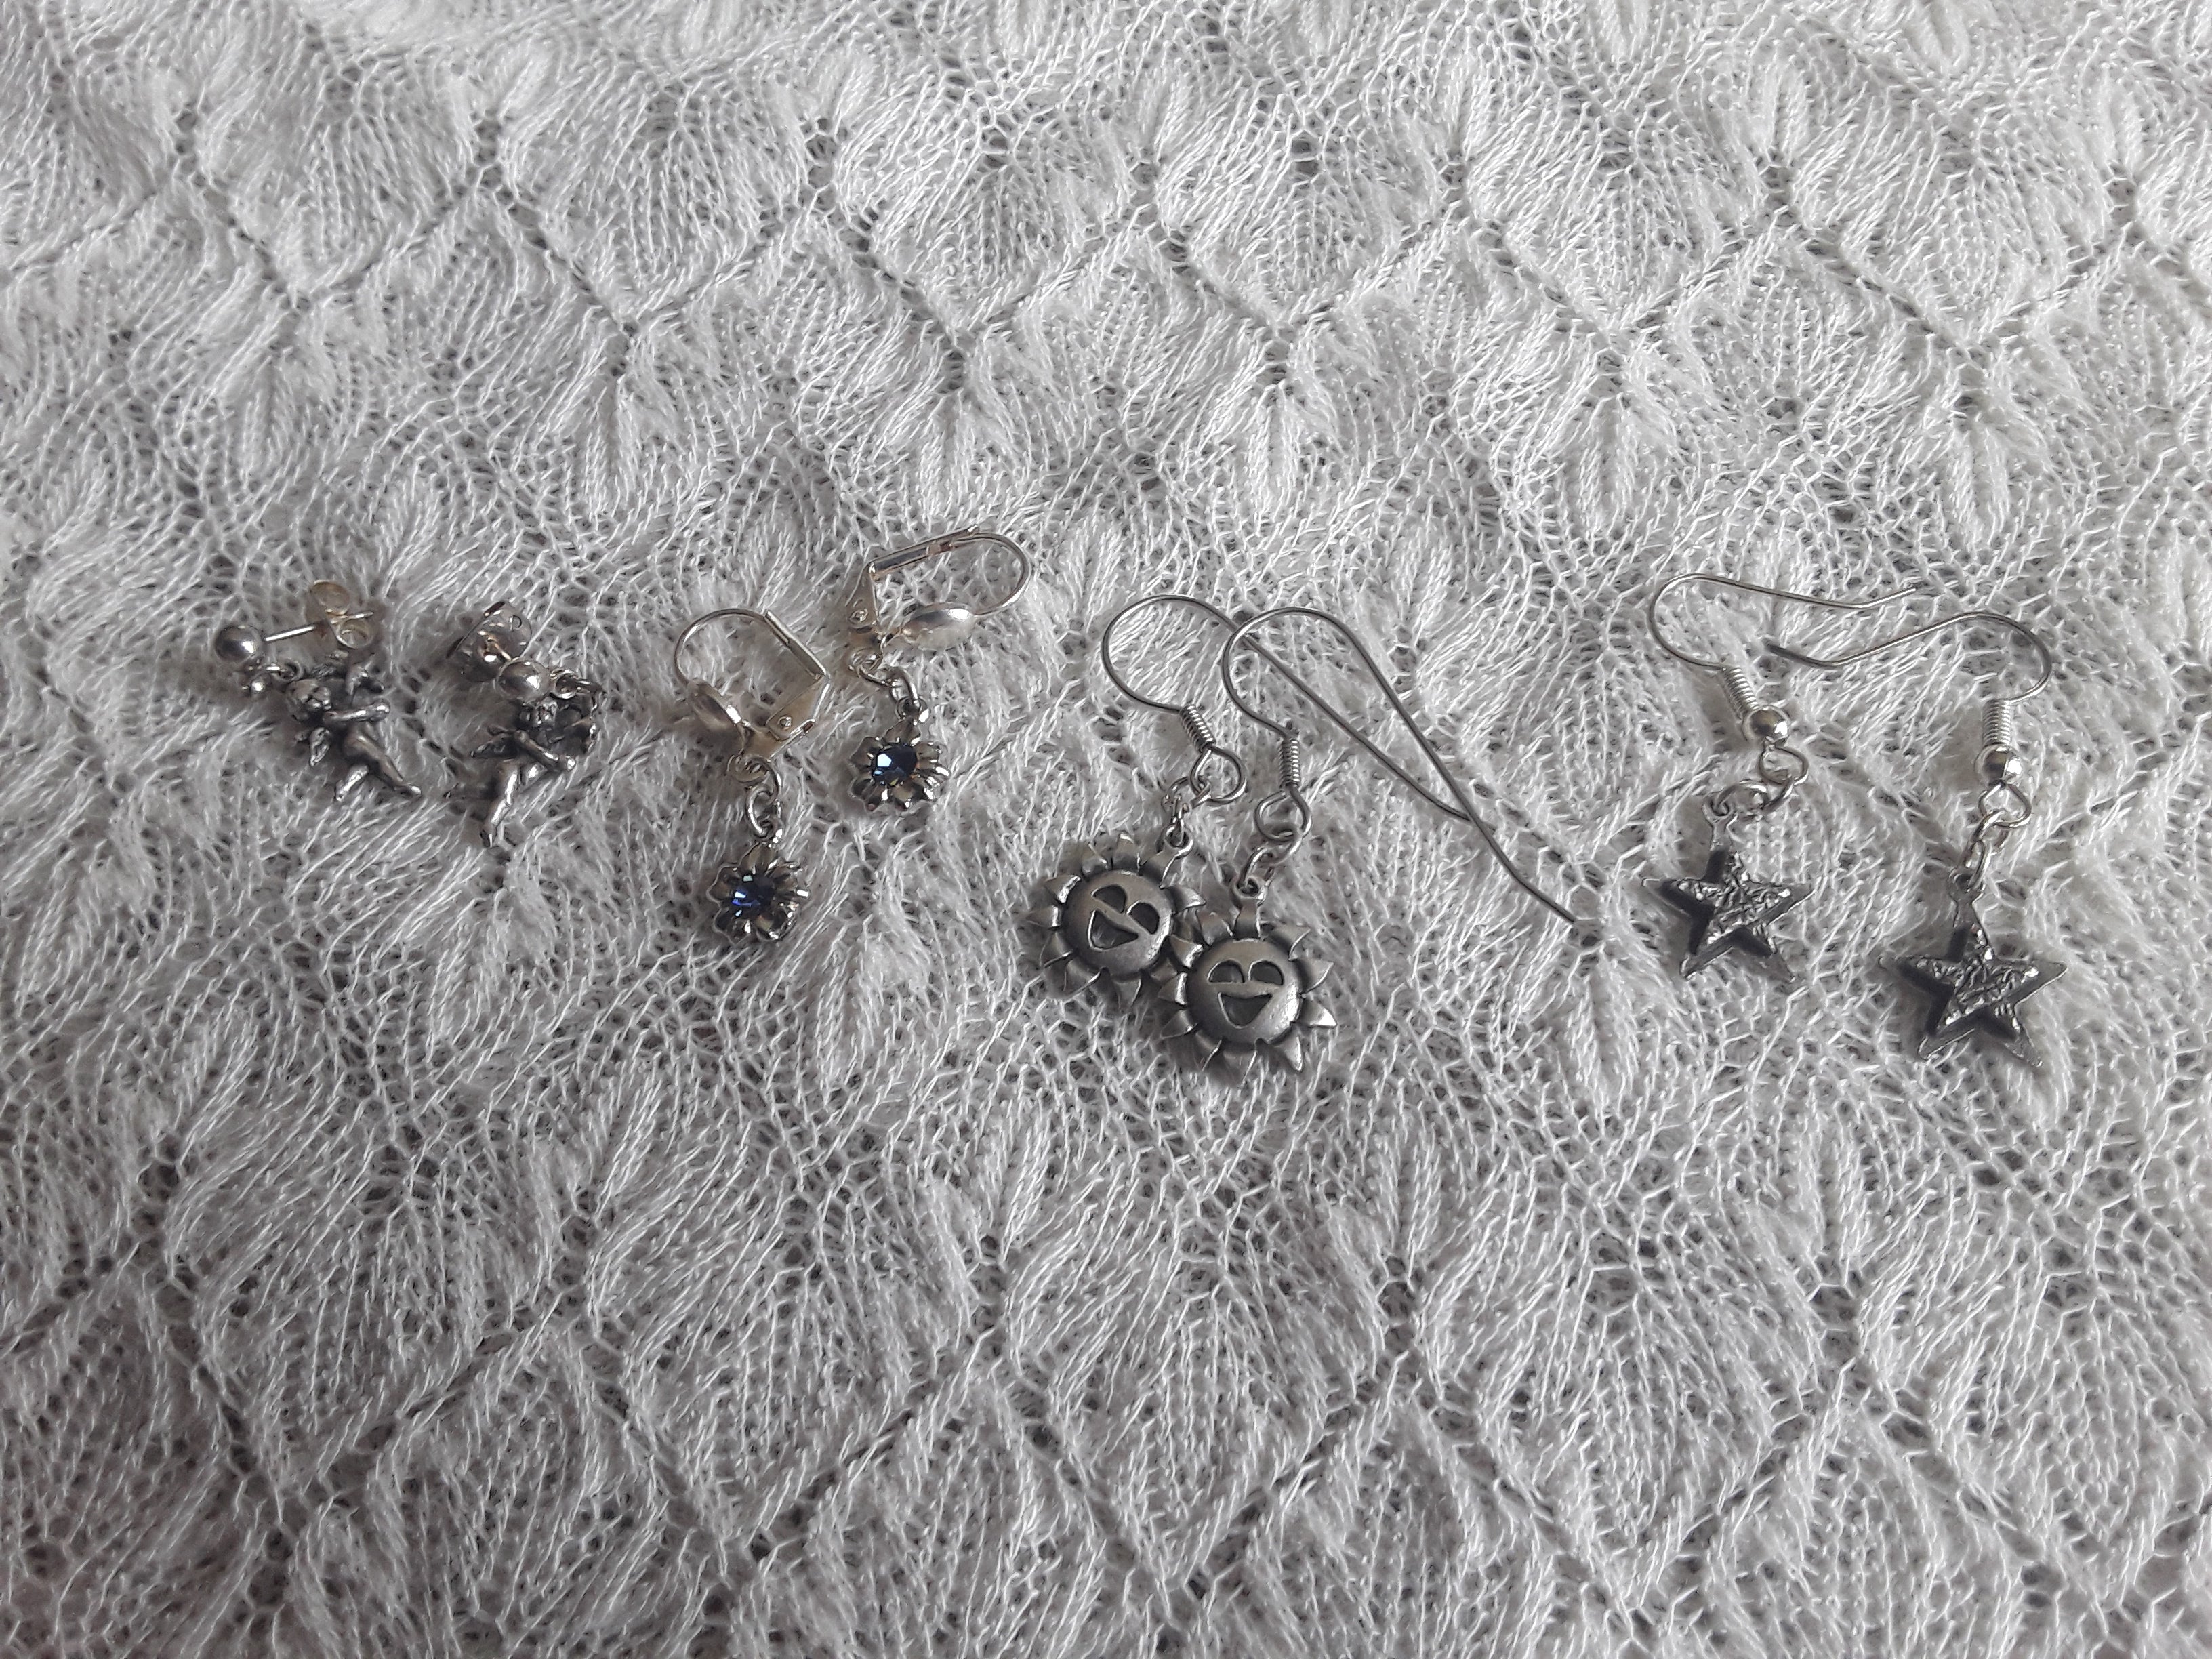 Four Pack of Miscellaneous Earrings